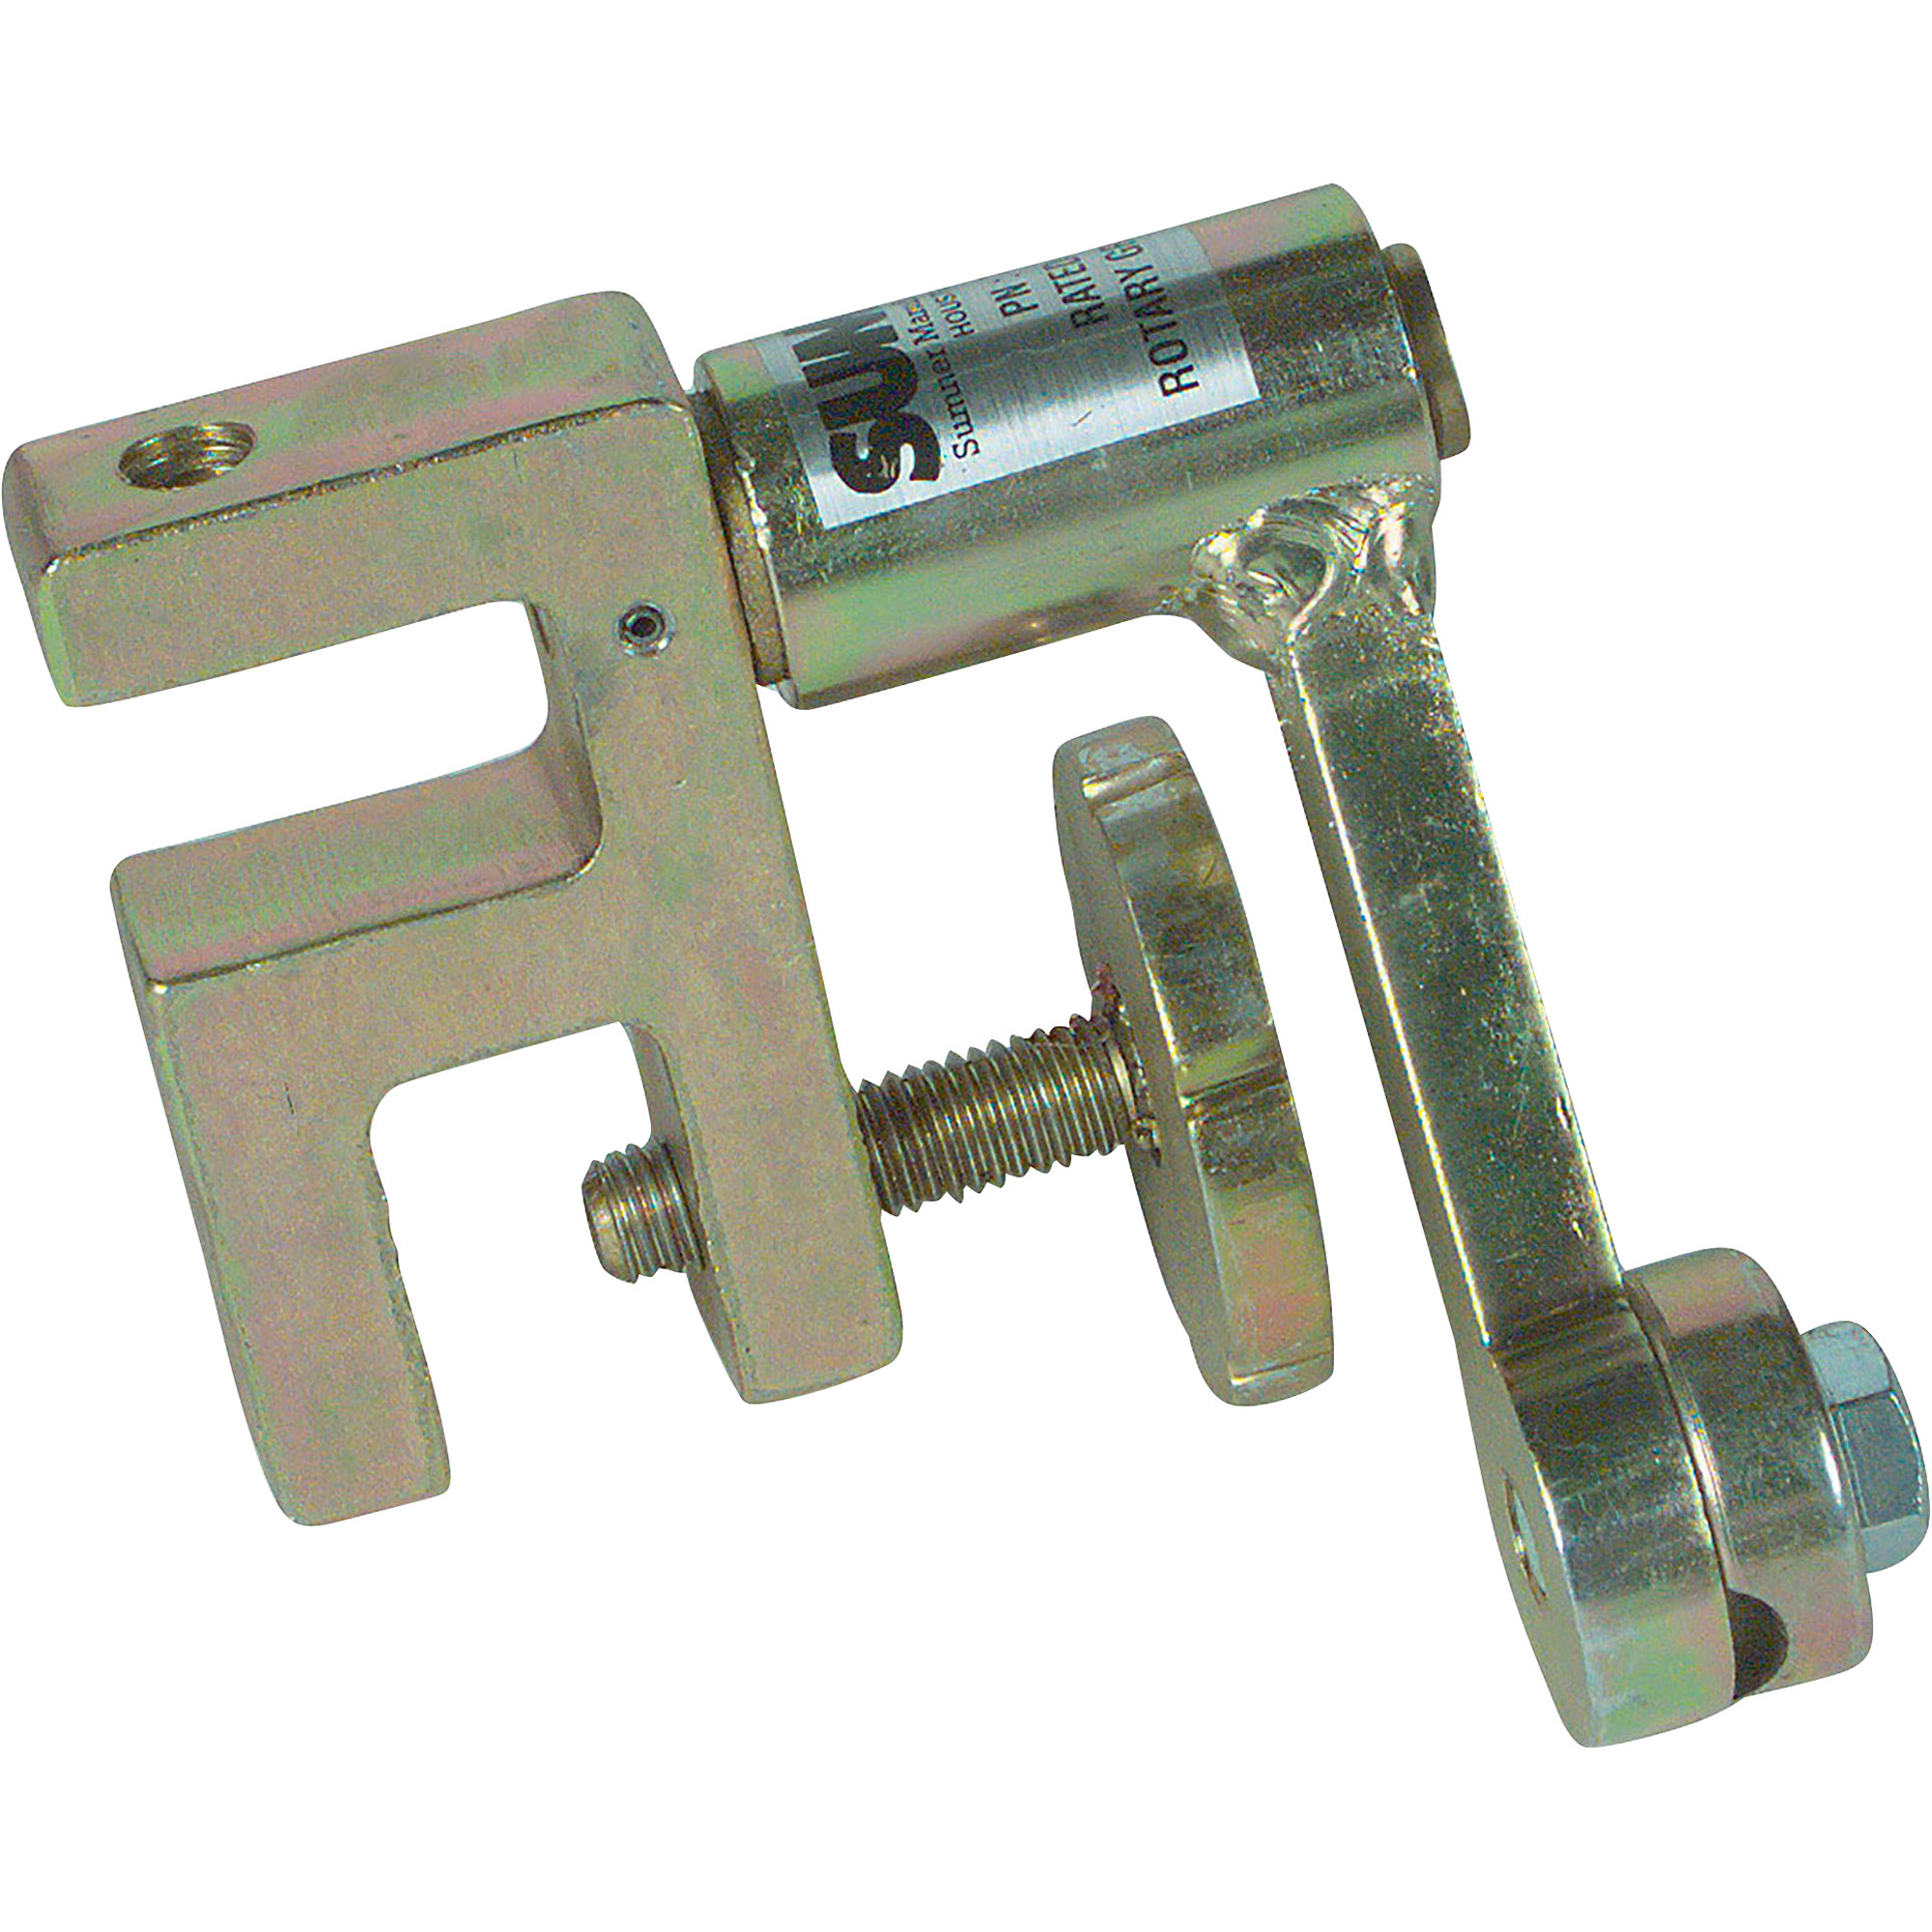 Sumner Rotary Ground Welding Clamp, up to 400 Amps, Model 780435